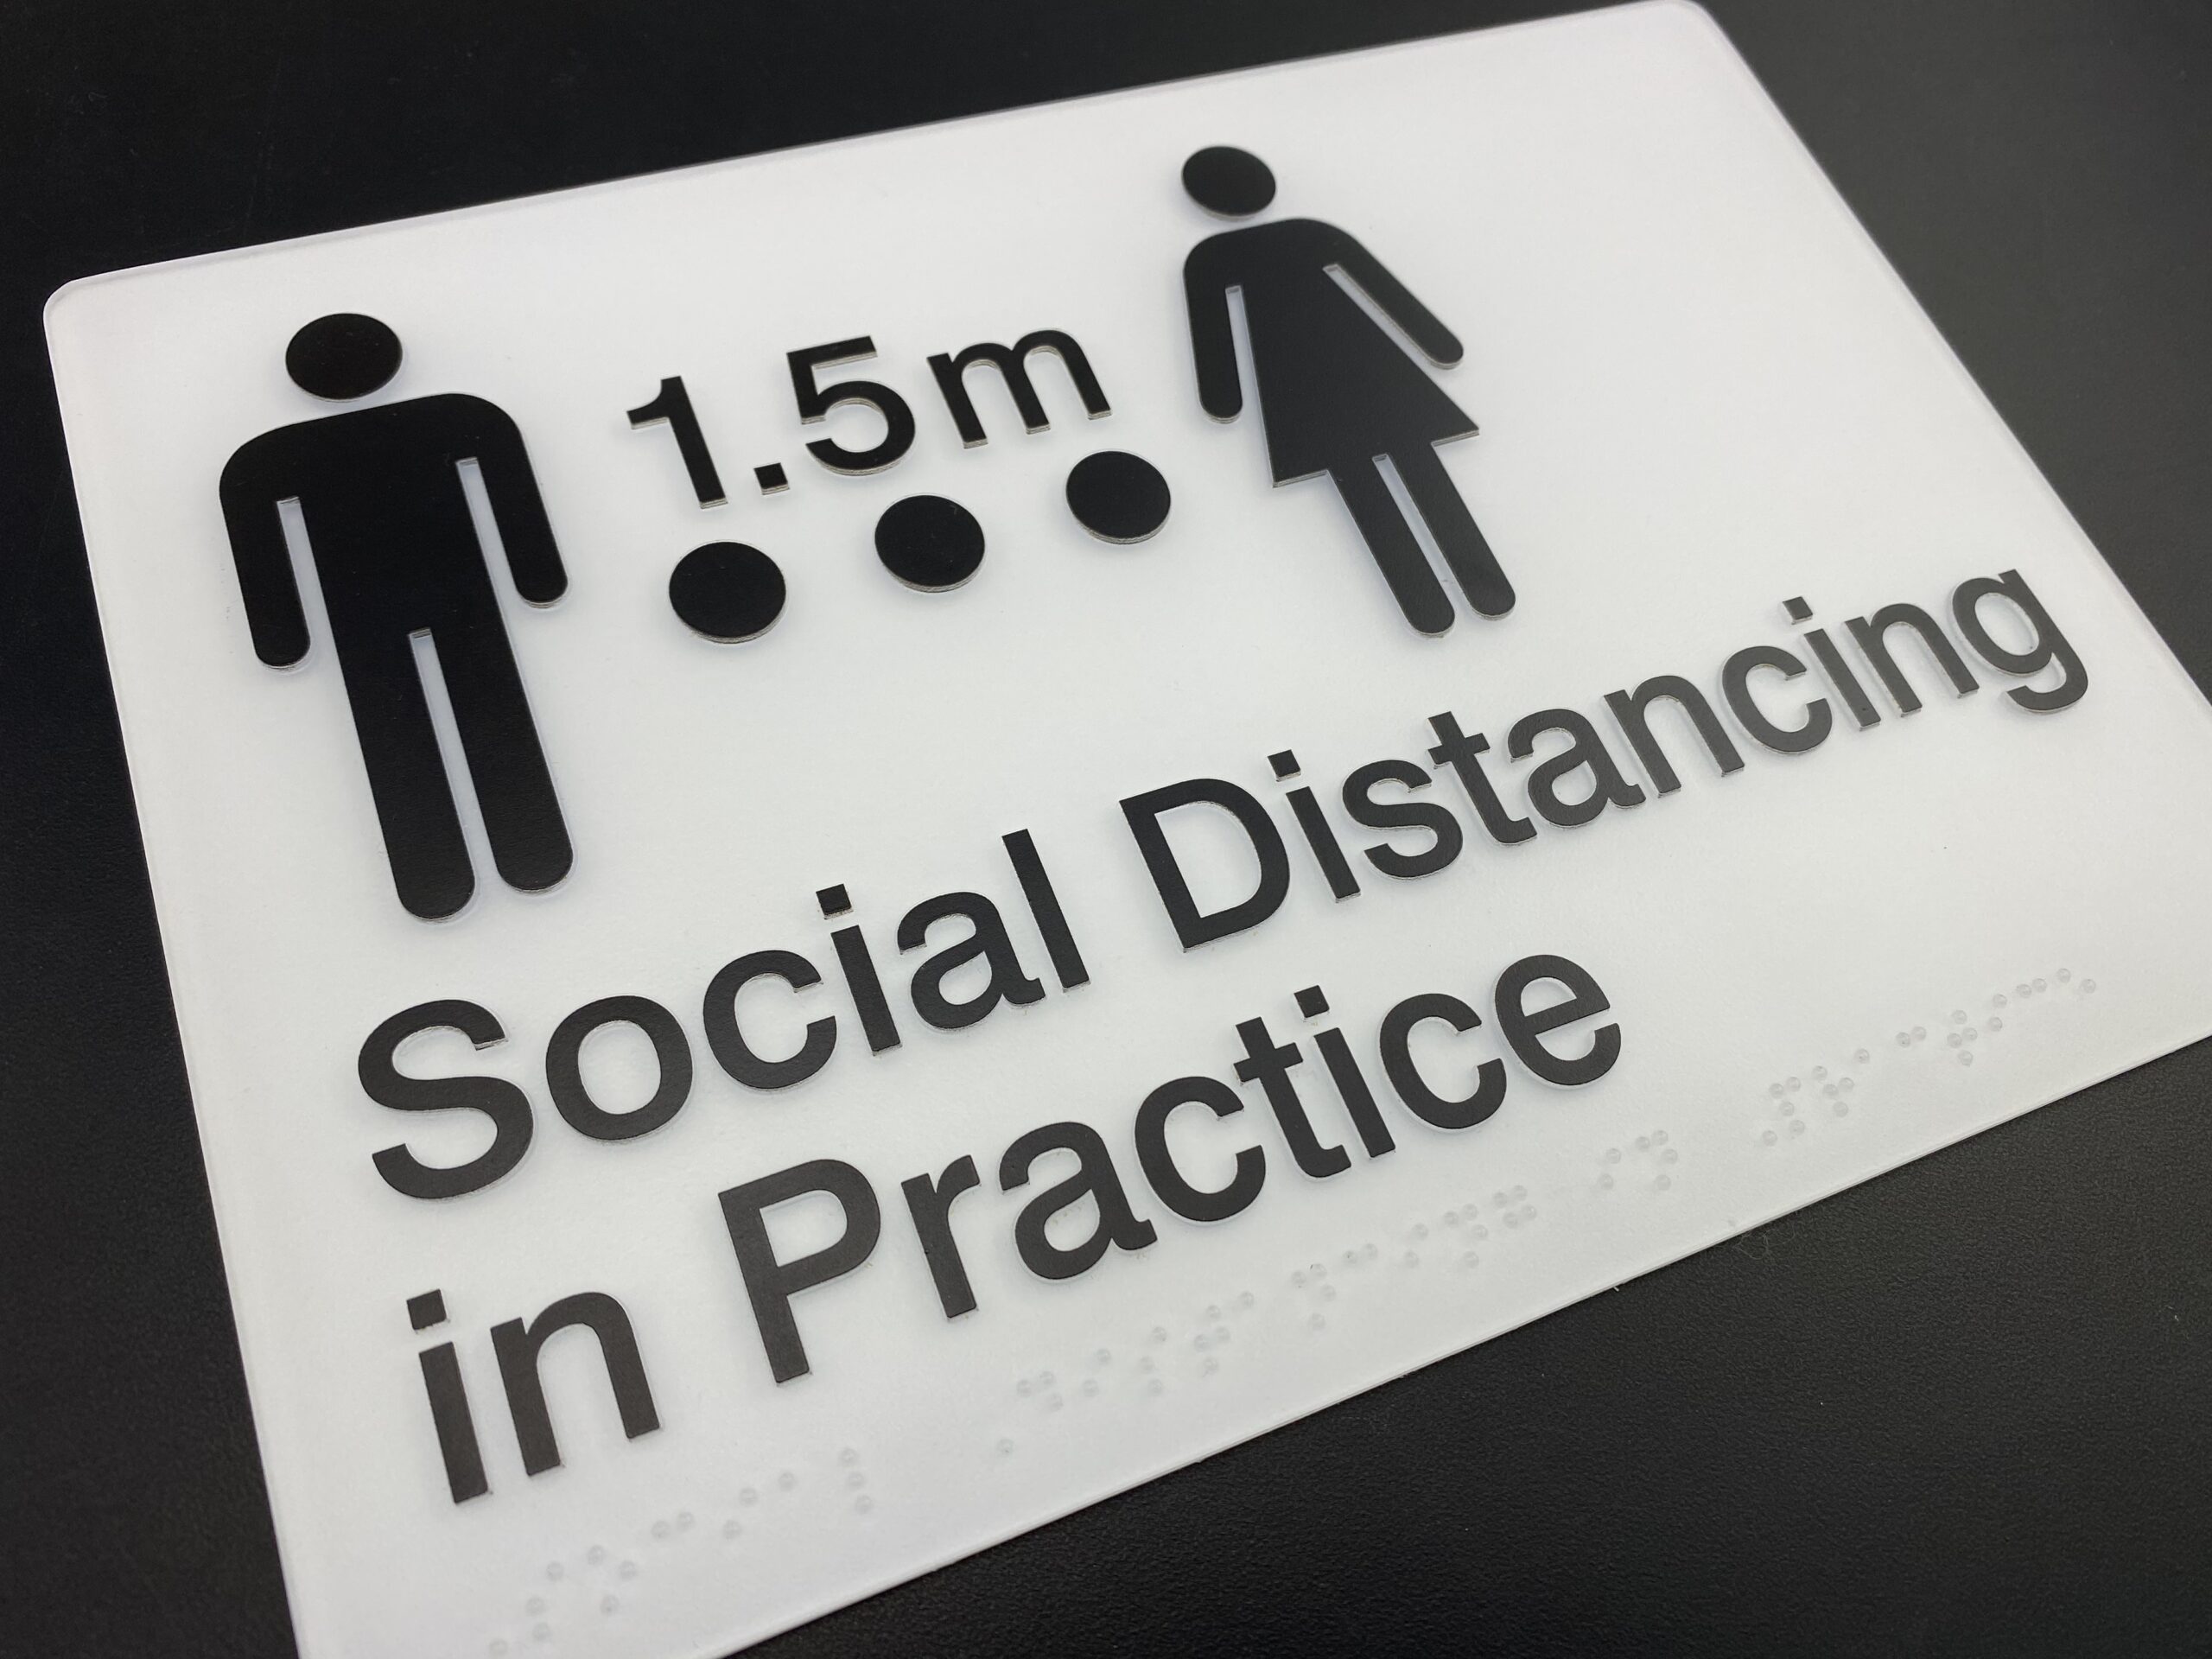 1.5m Social Distancing Braille Sign